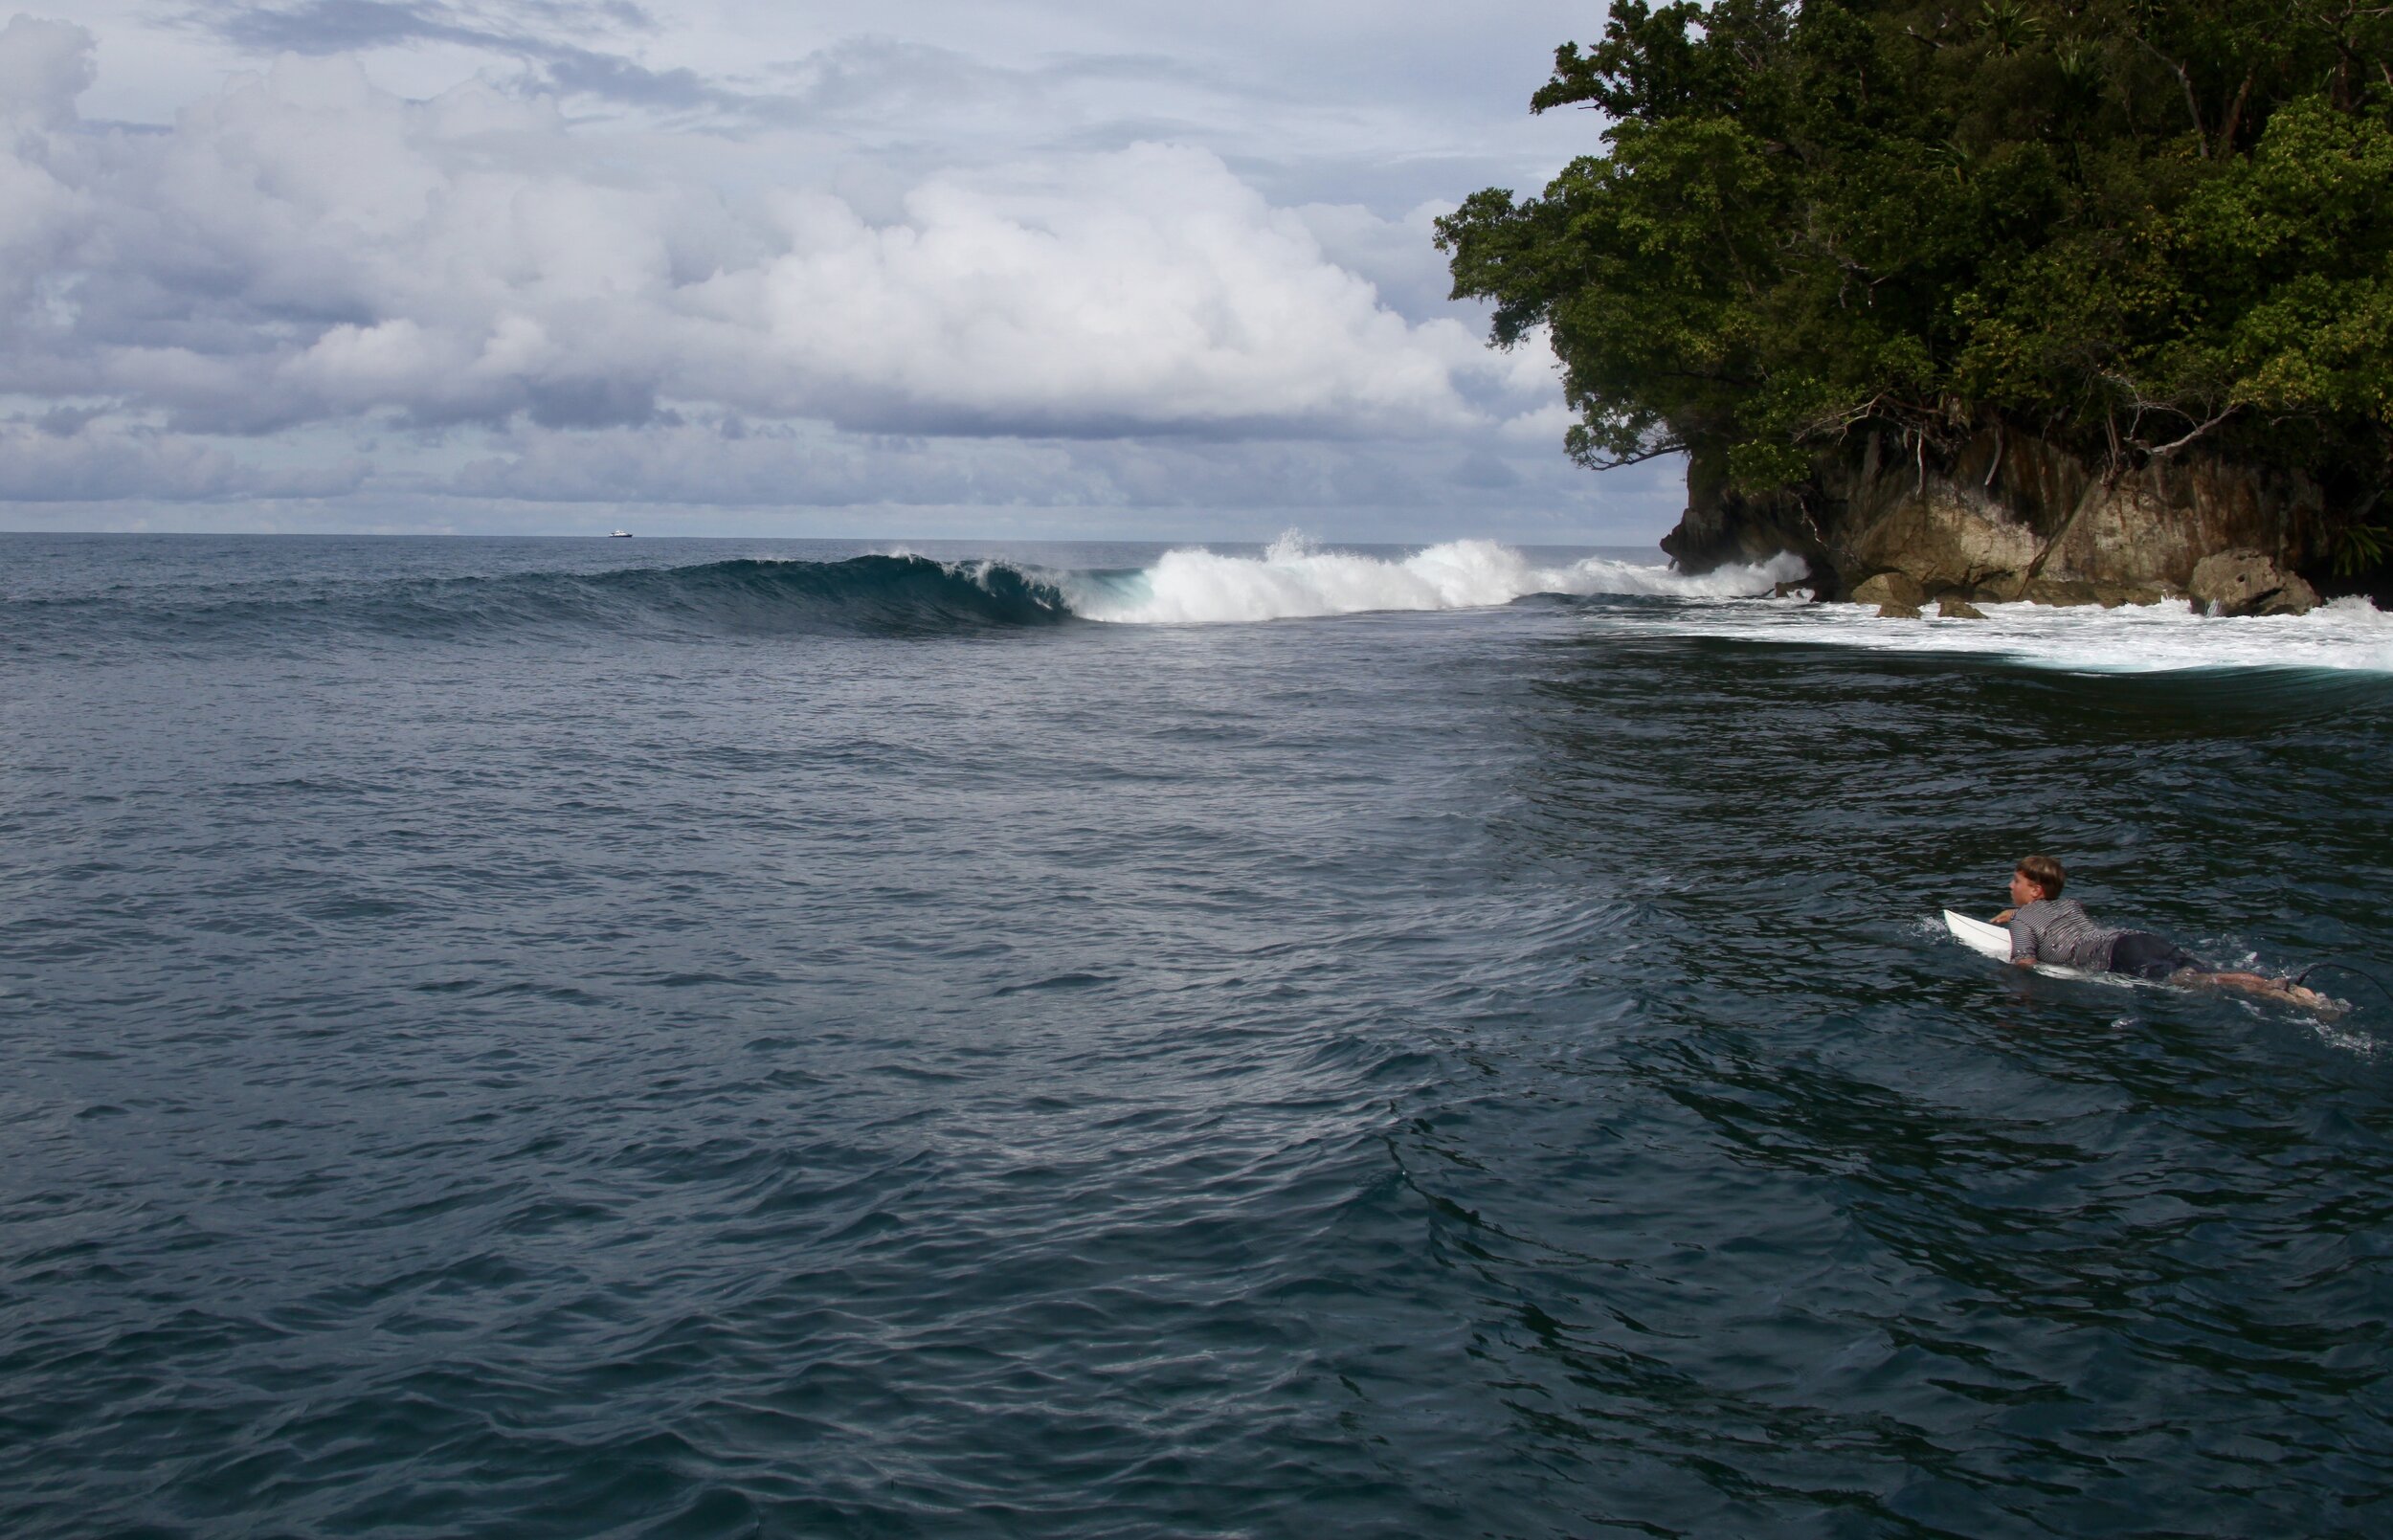  Alex Baker paddles out at a previously unsurfed right somewhere in Melanesia Photo: Martin Daly  